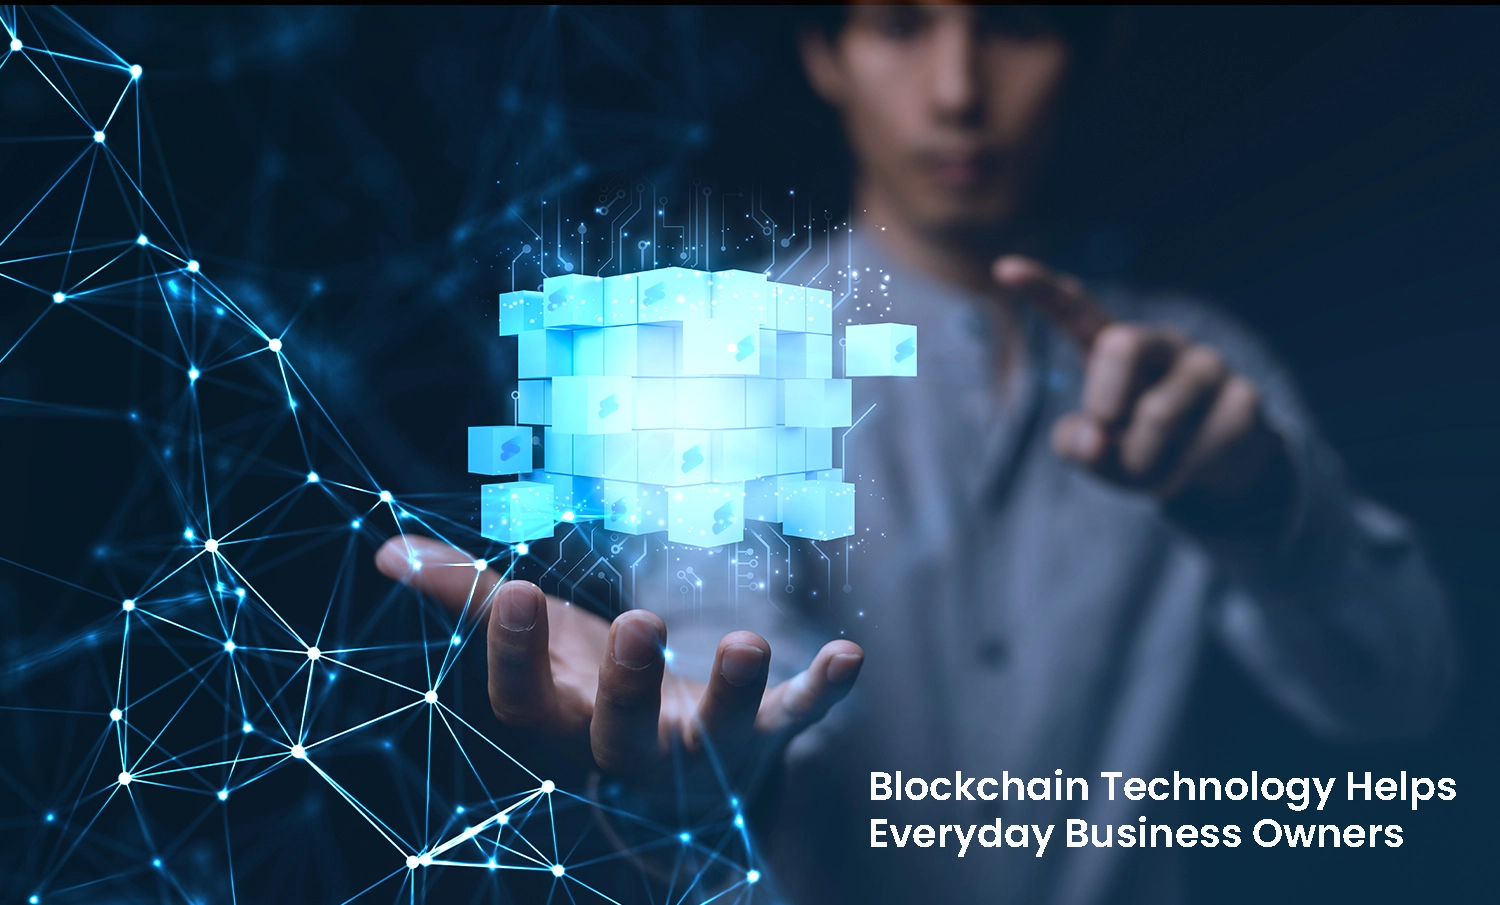 How Blockchain Technology Helps Everyday Business Owners